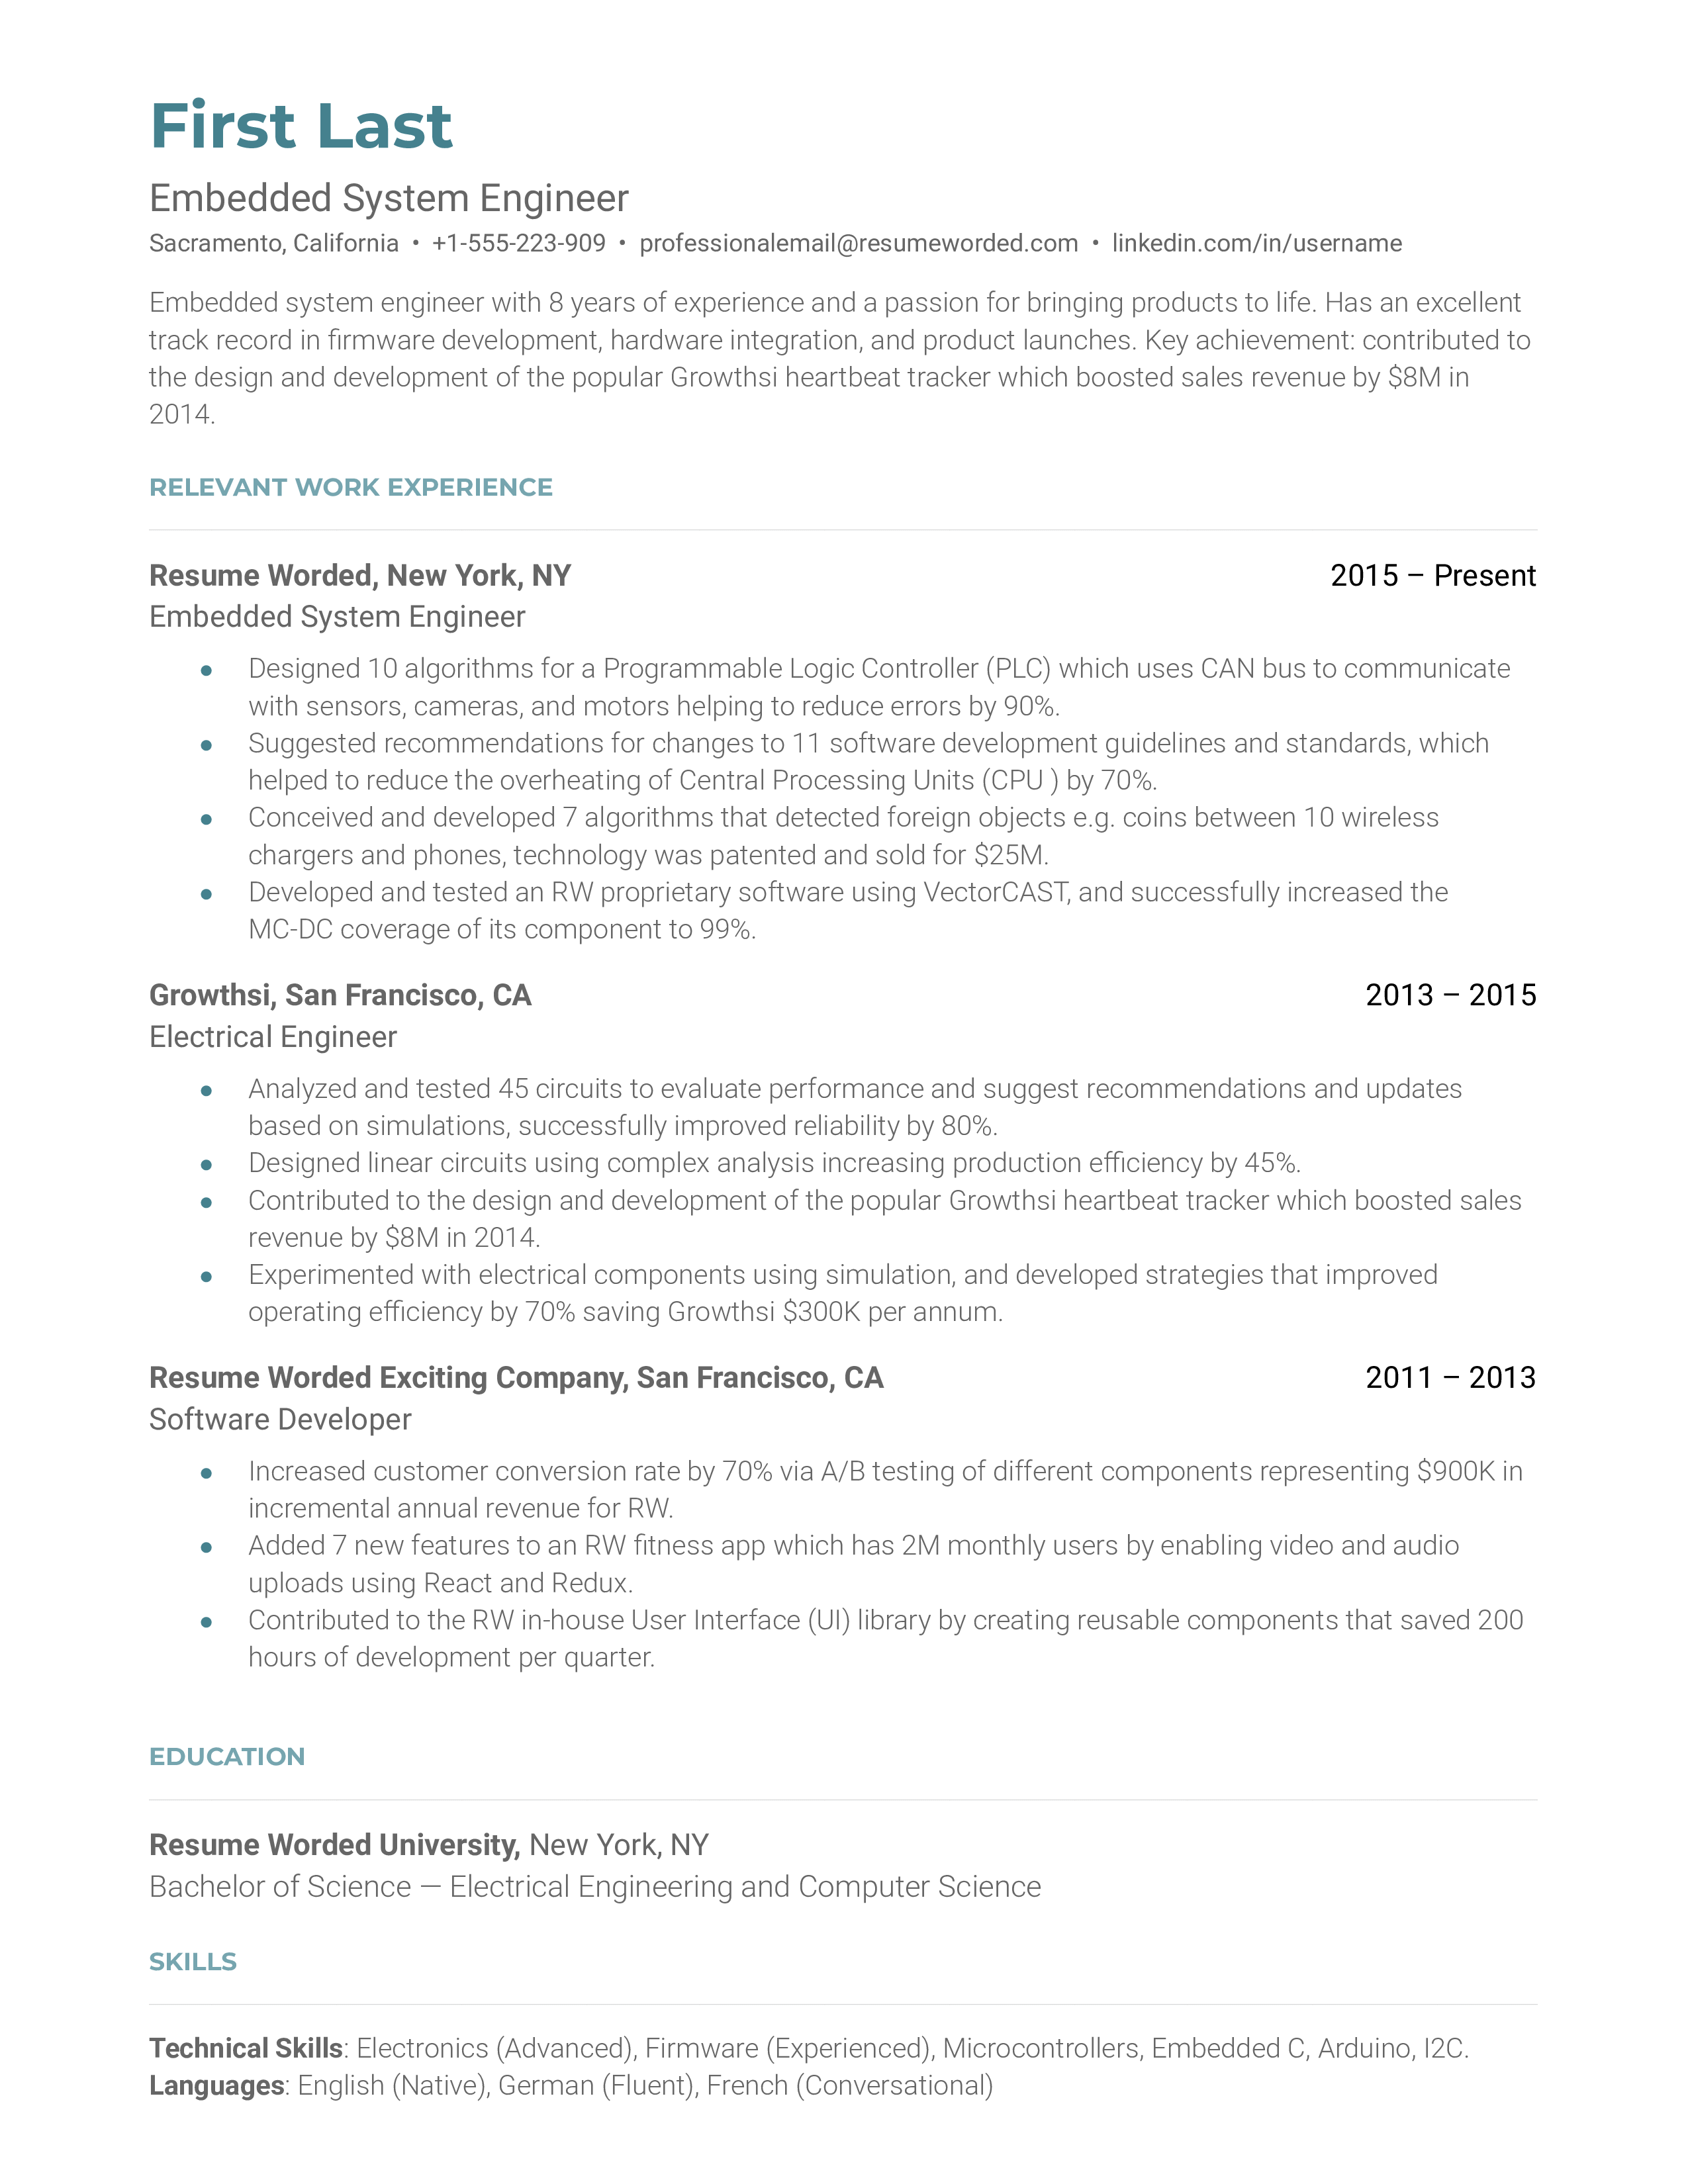 A snapshot of a CV for an Embedded System Engineer role.